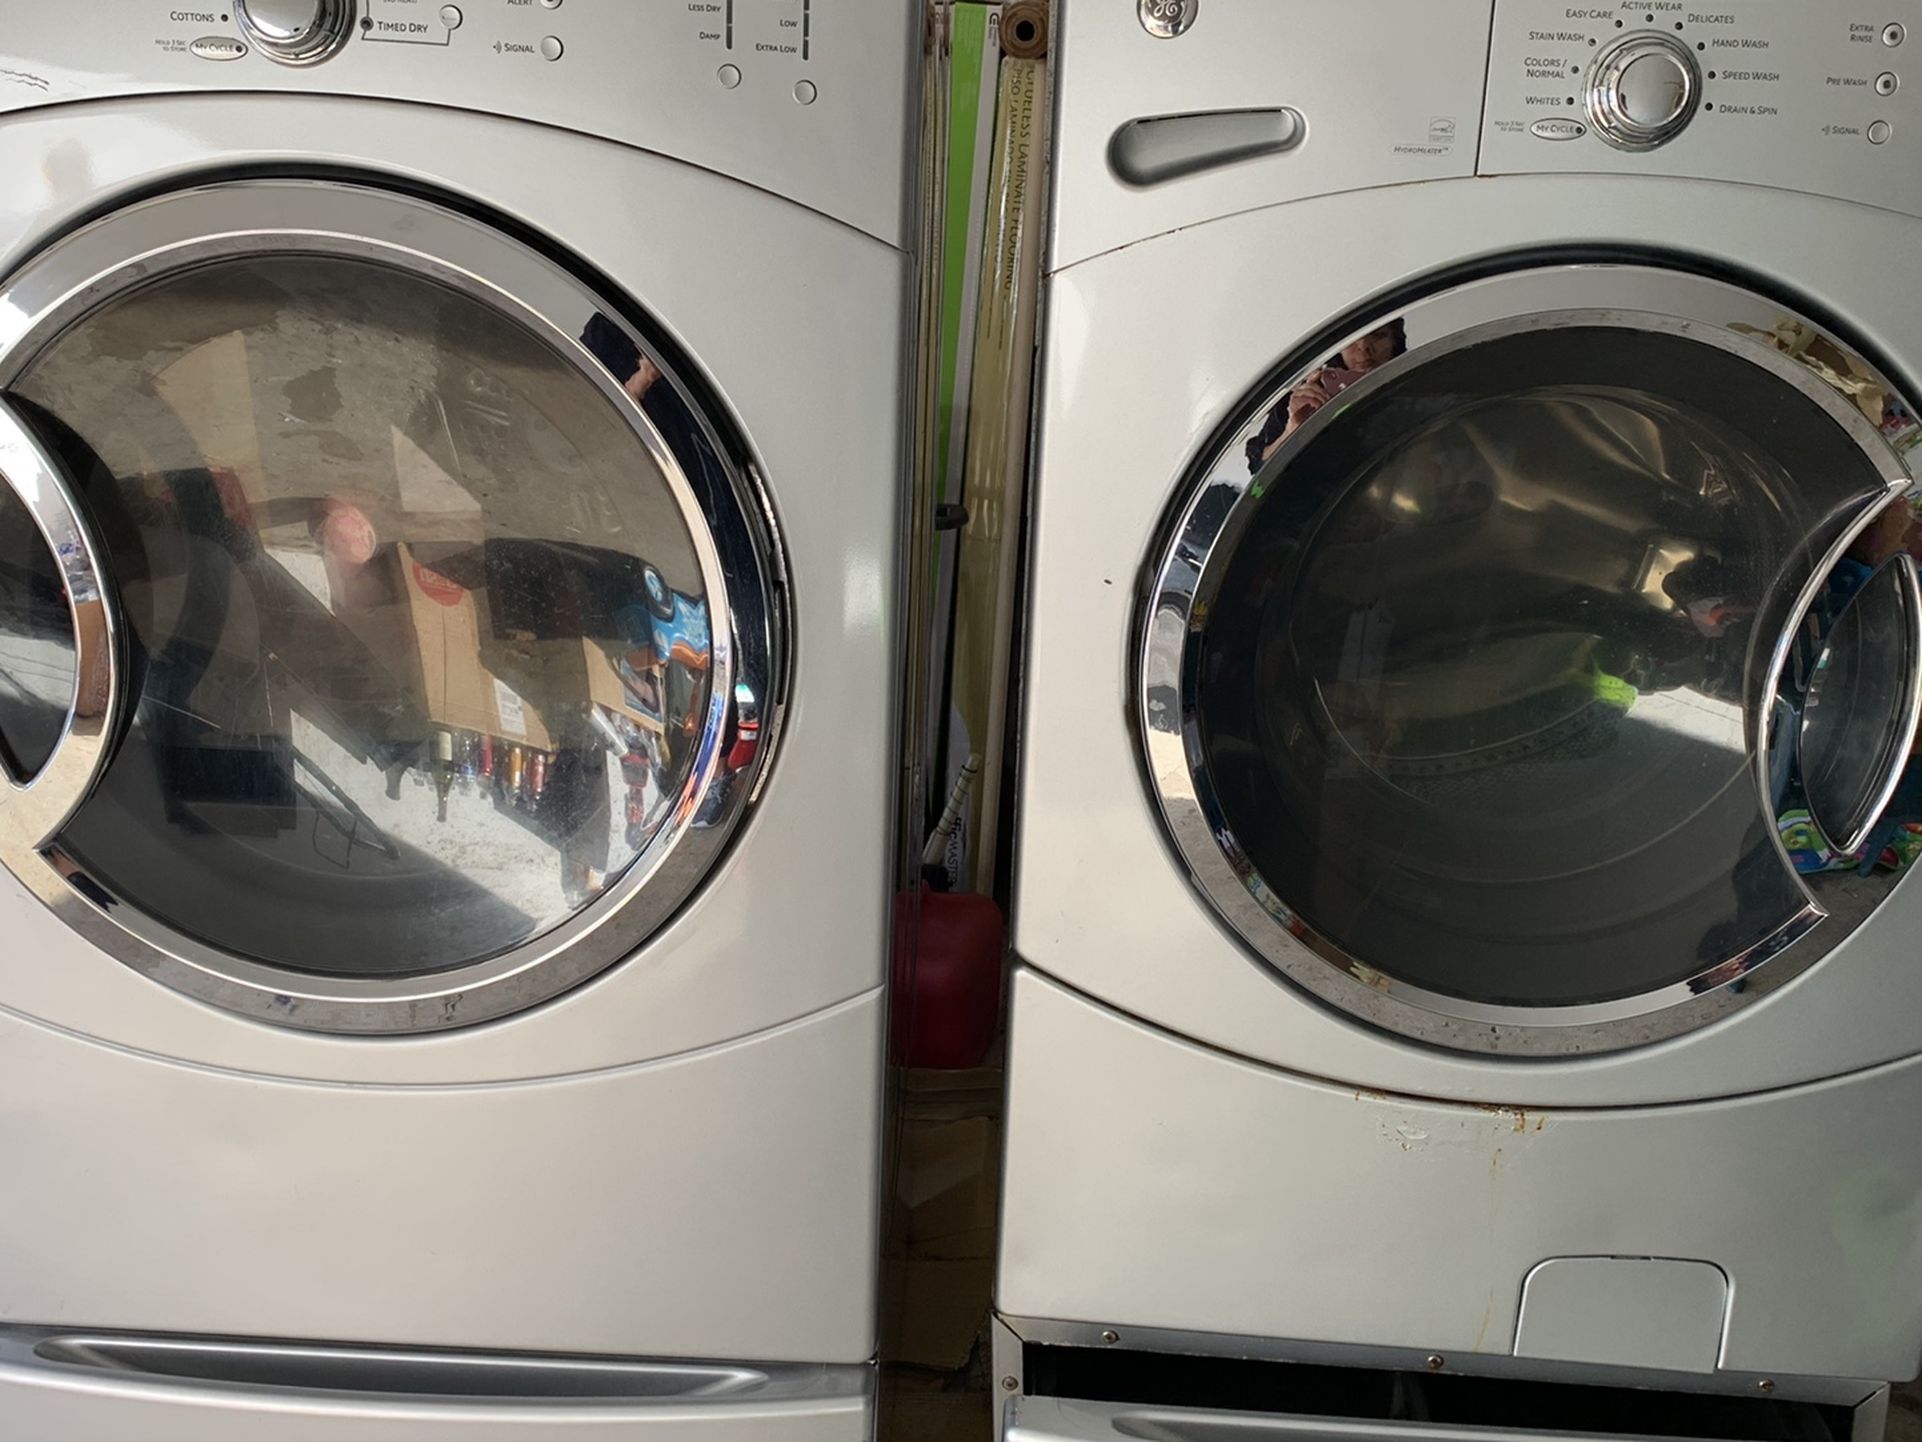 GE Washer and Dryer 28 X53 1/2. I’m asking $390 for them.